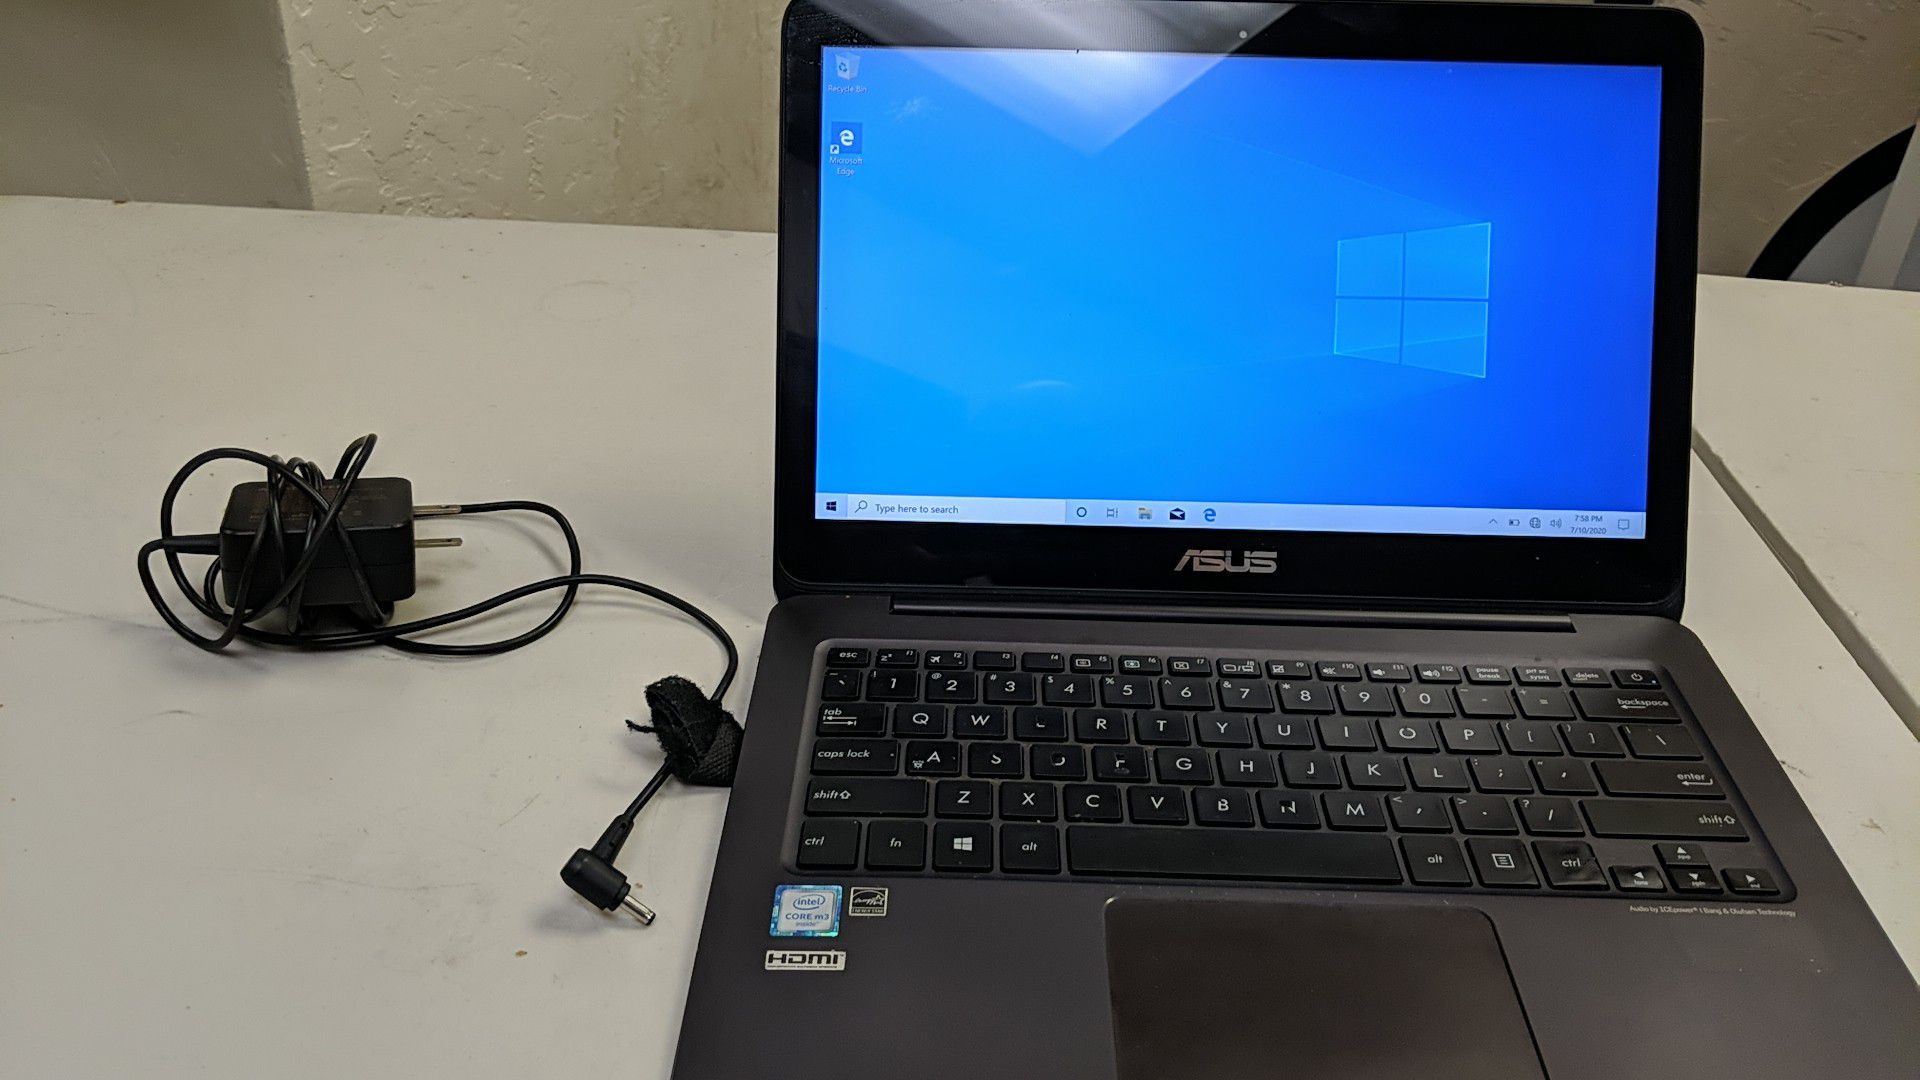 Asus Zenbook UX305C Touchscreen Laptop with Windows 10 and 250 GB SSD!